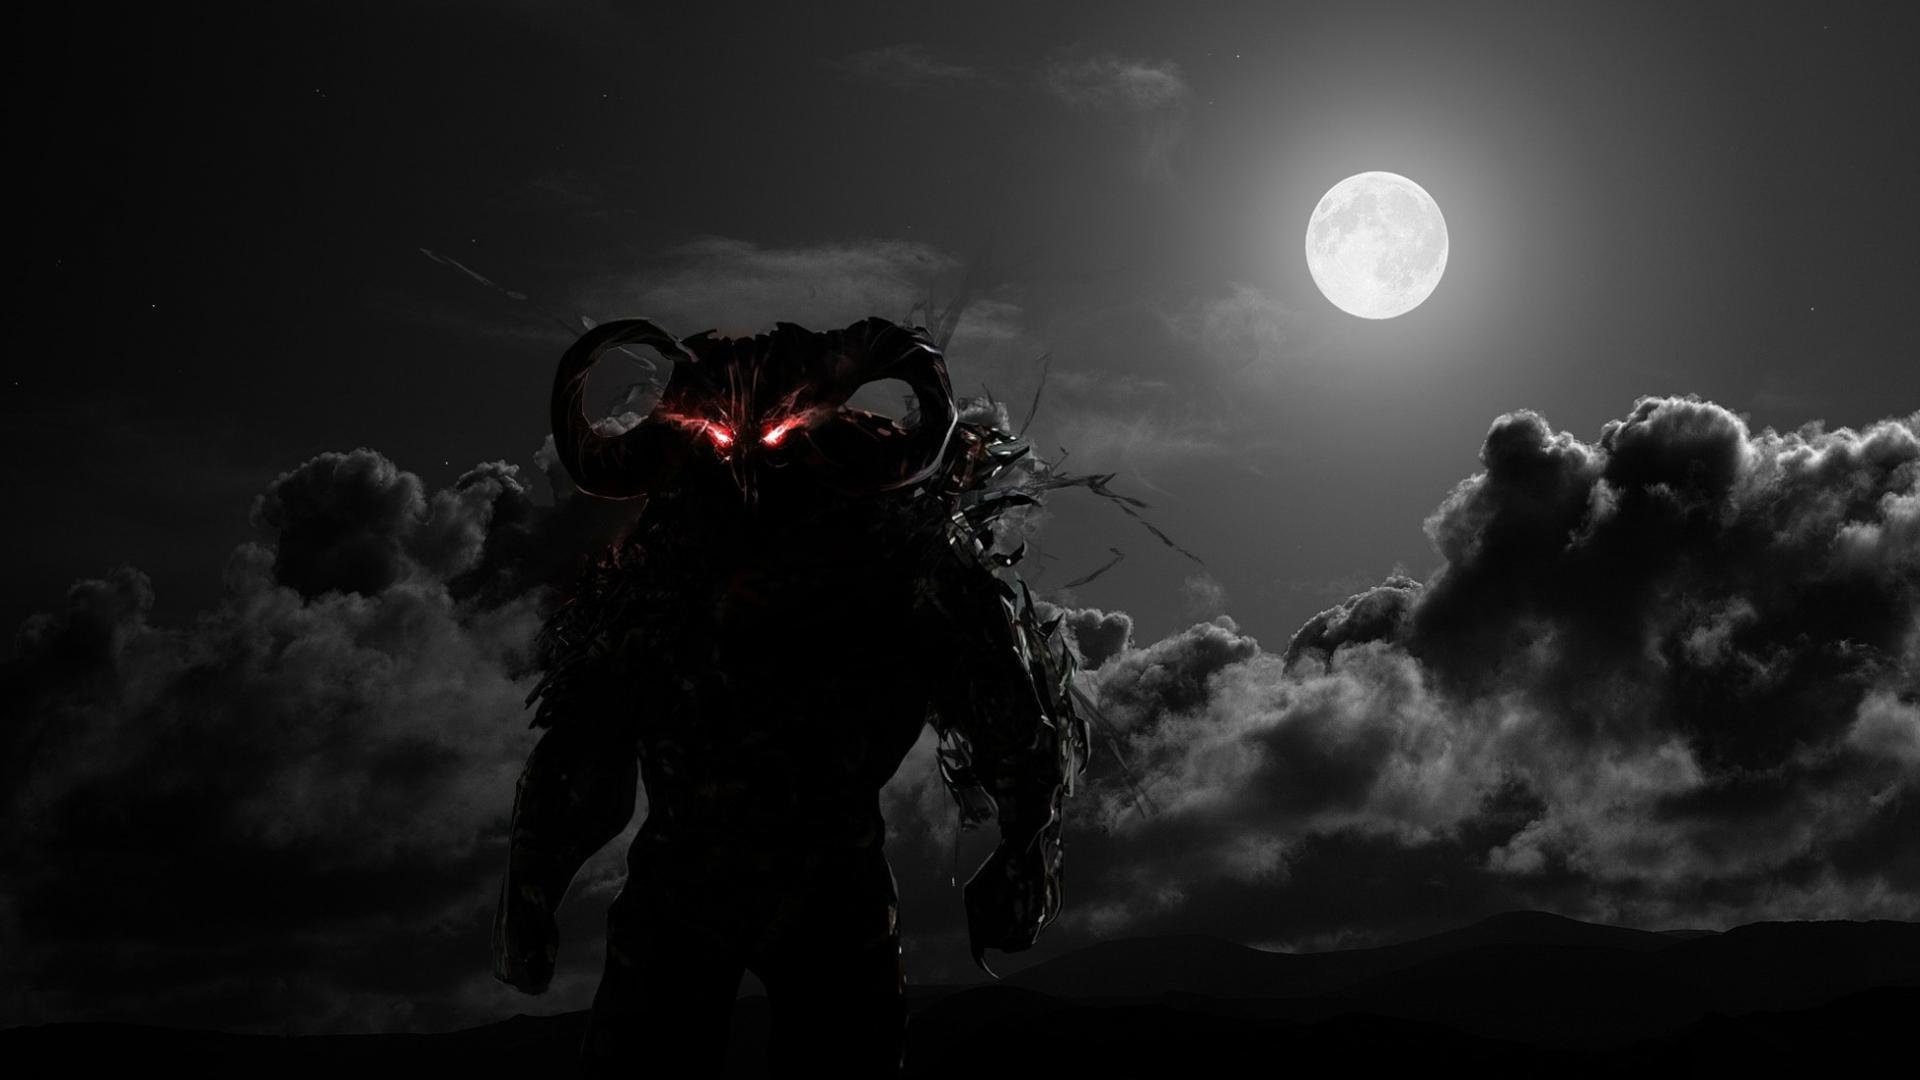 Download Hd 1080p Demon Pc Wallpaper Id - Aesthetic Black And White Background , HD Wallpaper & Backgrounds